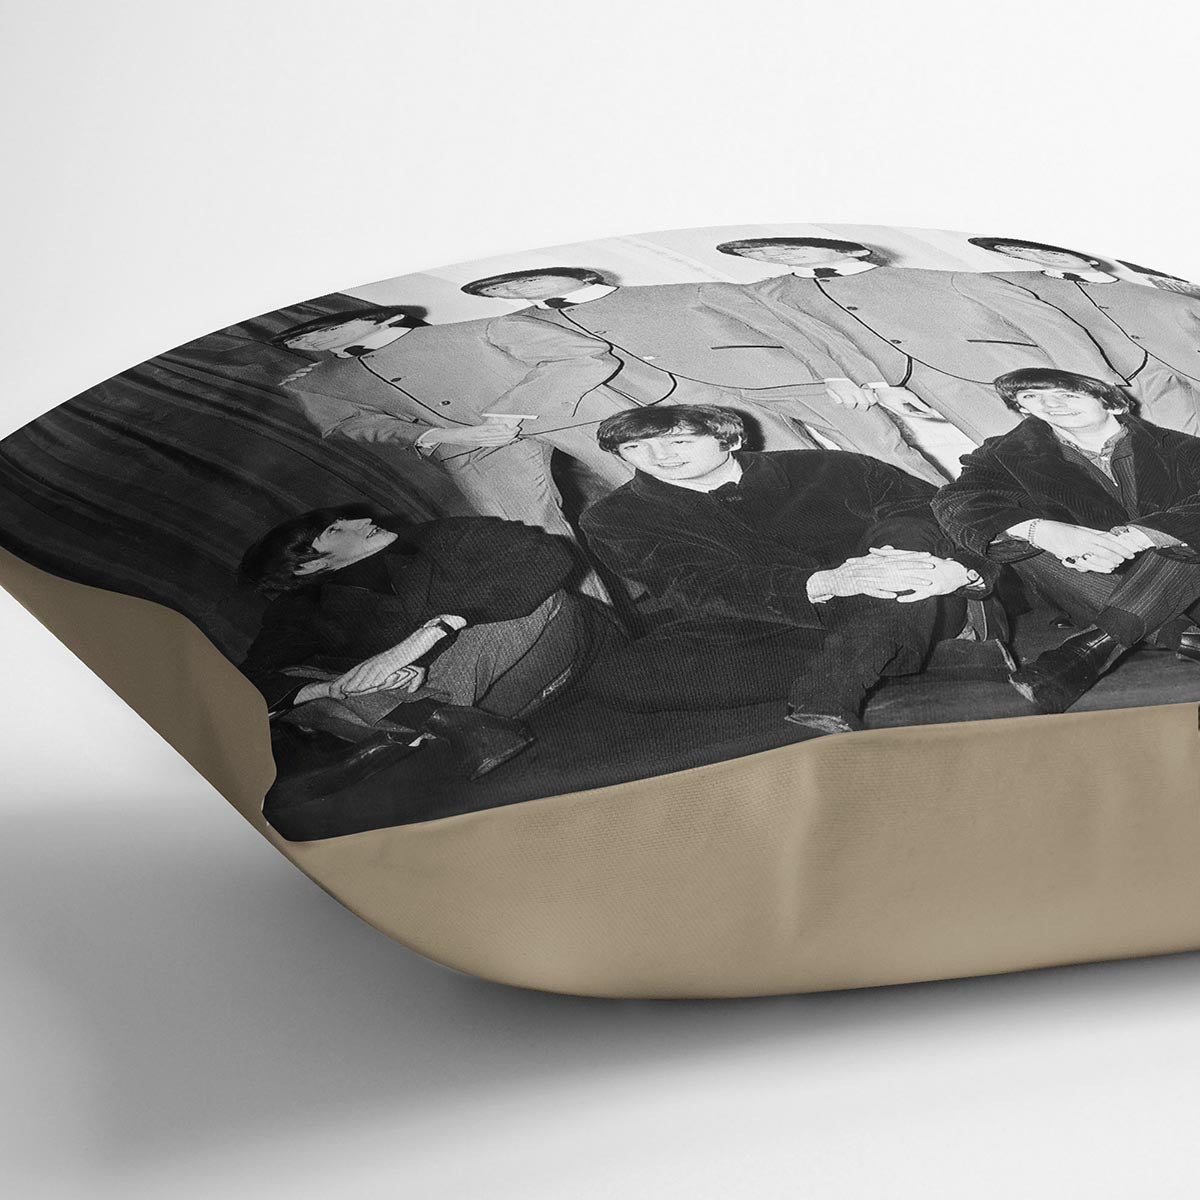 The Beatles at Madame Tussauds Cushion